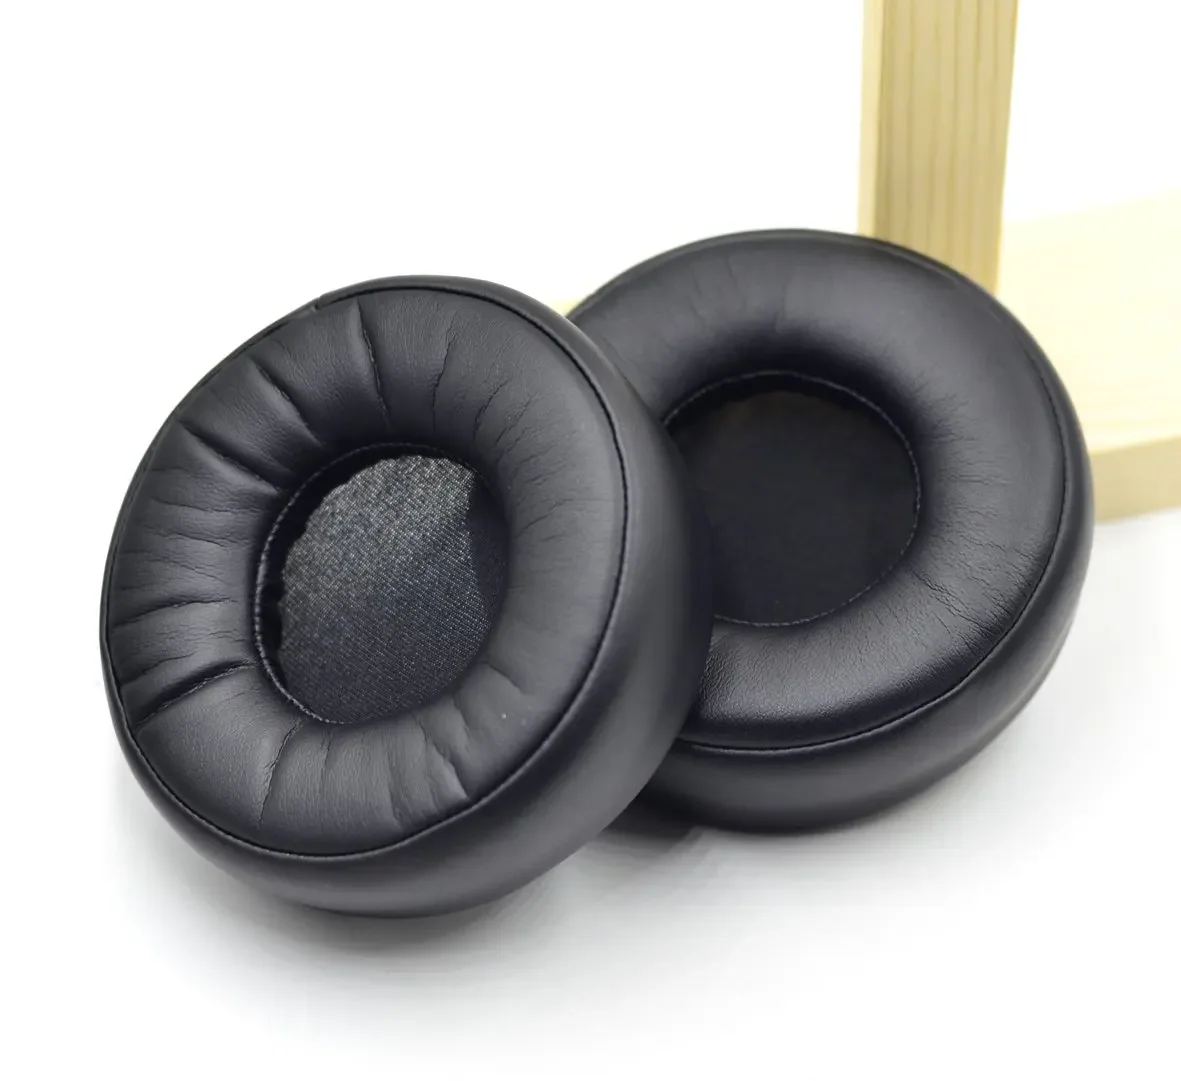 

Replacement EarPads Cushion Cover for SteelSeries Siberia 650 Gaming Headset High Quality Protein Memory Foam for Siberia 650